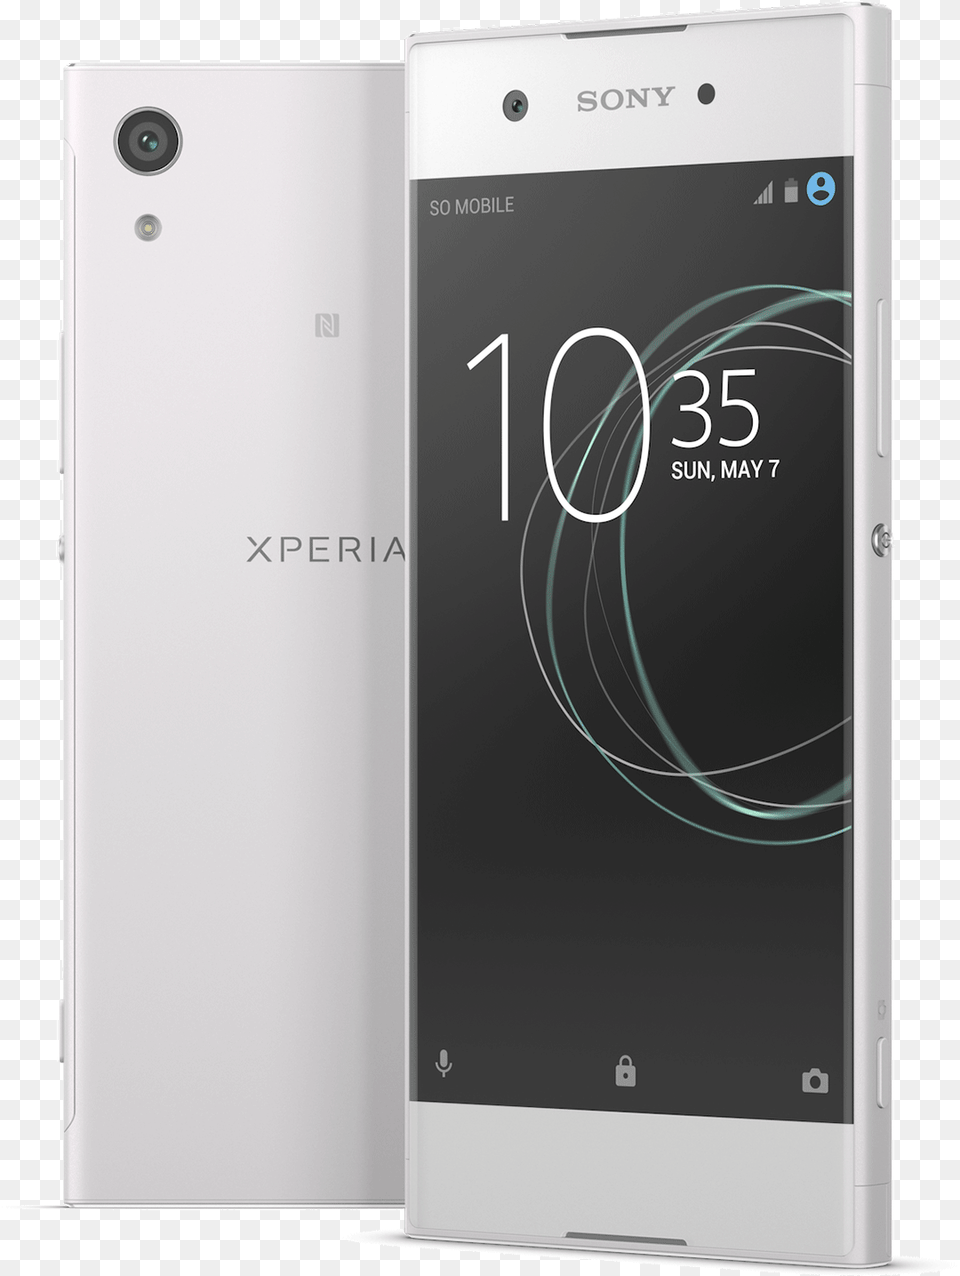 New Xperia Xa1 And Xa1 Ultra Bring Superior Sony Xperia, Electronics, Mobile Phone, Phone Free Transparent Png